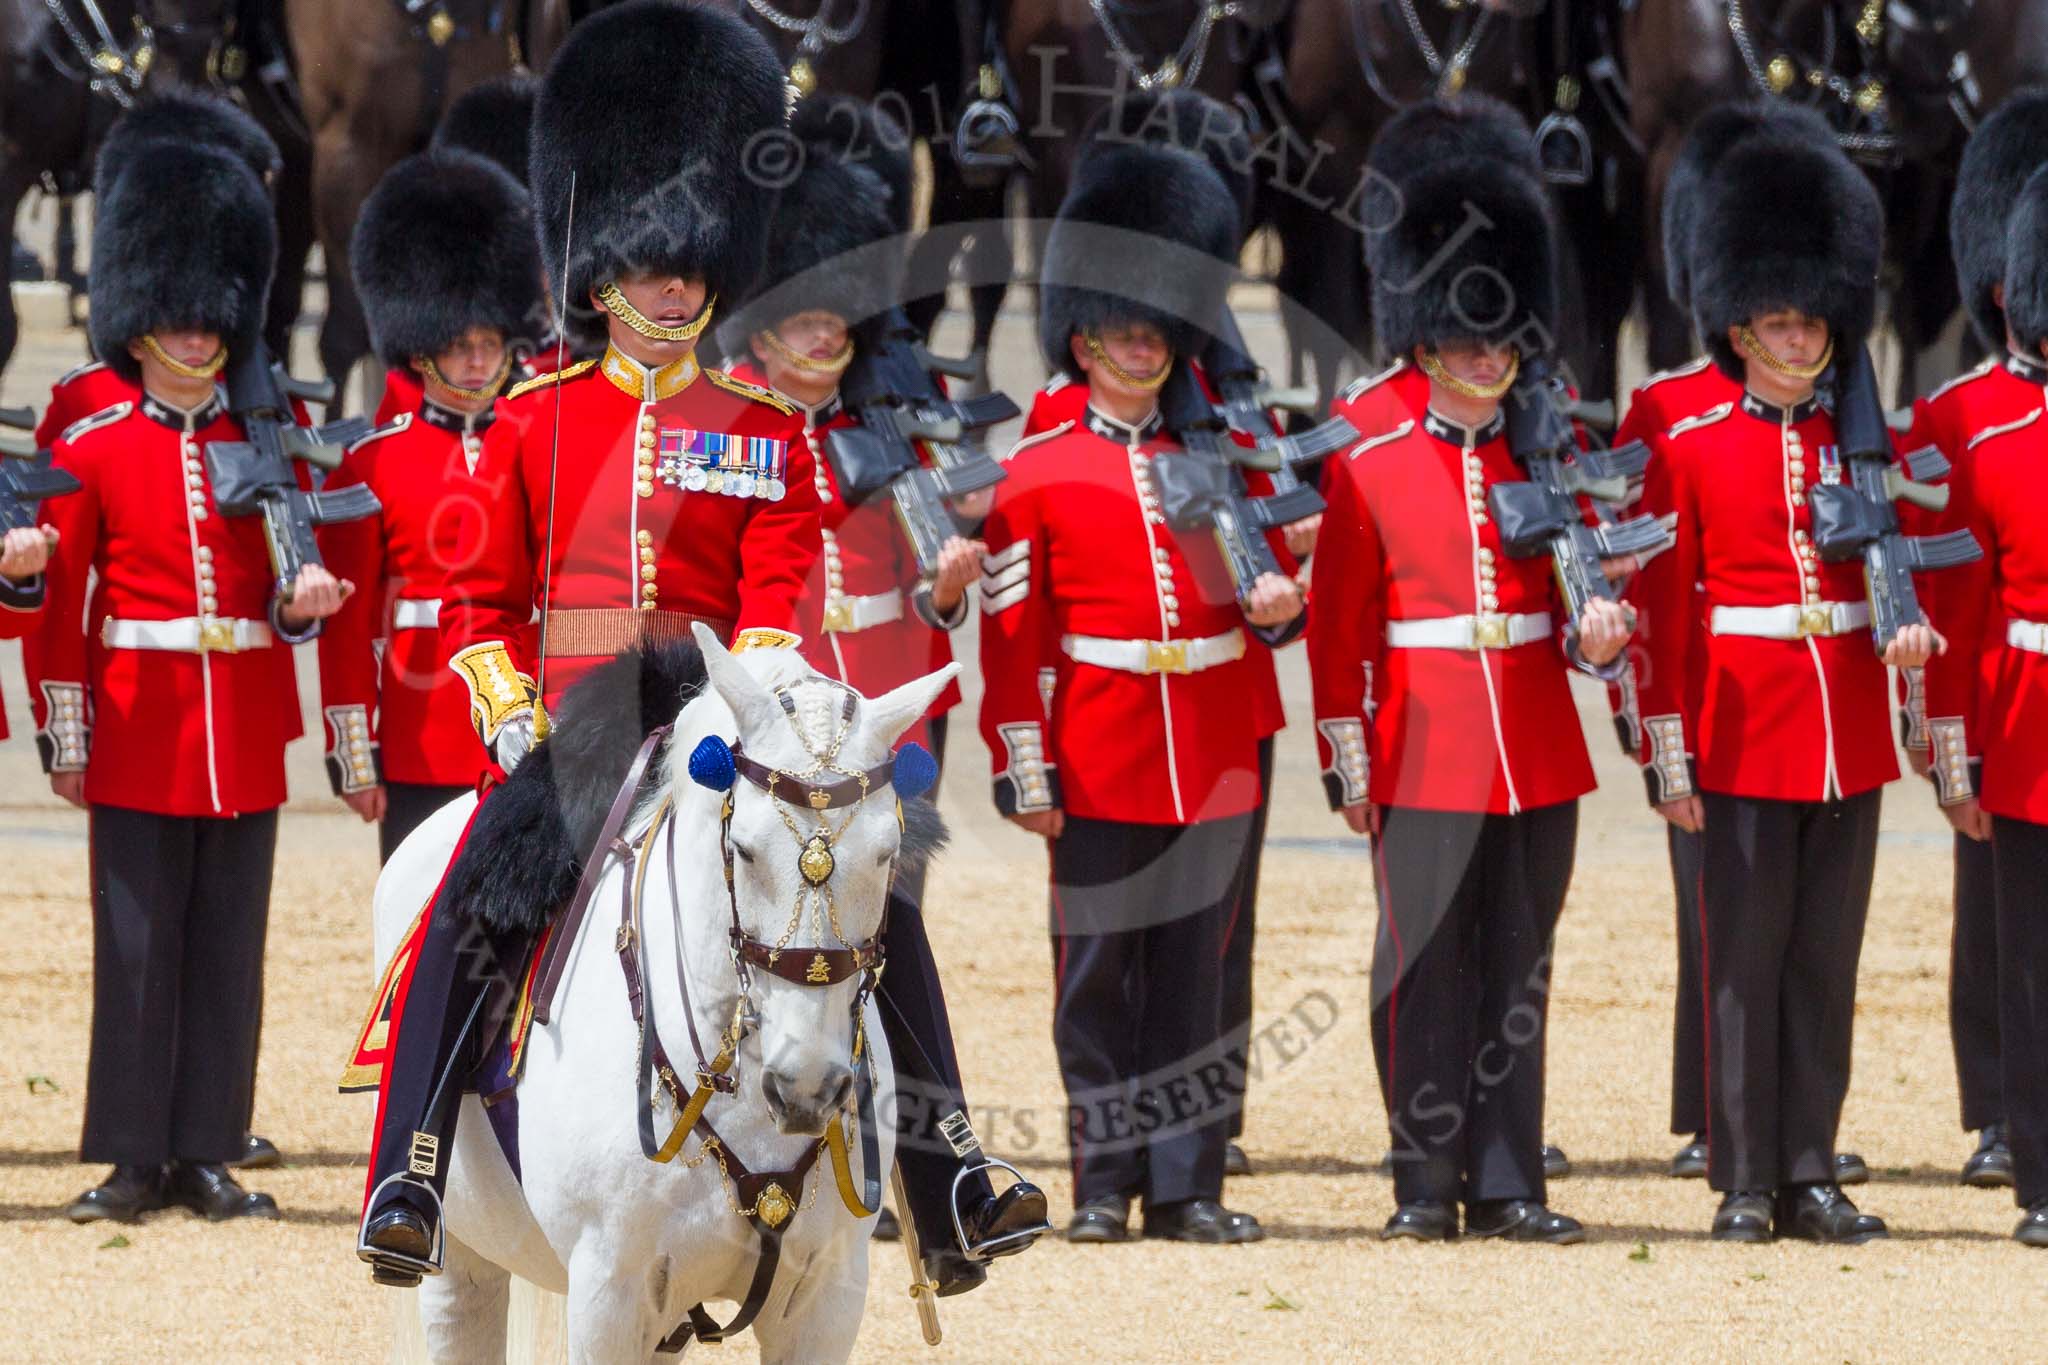 The Colonel's Review 2015.
Horse Guards Parade, Westminster,
London,

United Kingdom,
on 06 June 2015 at 12:00, image #558